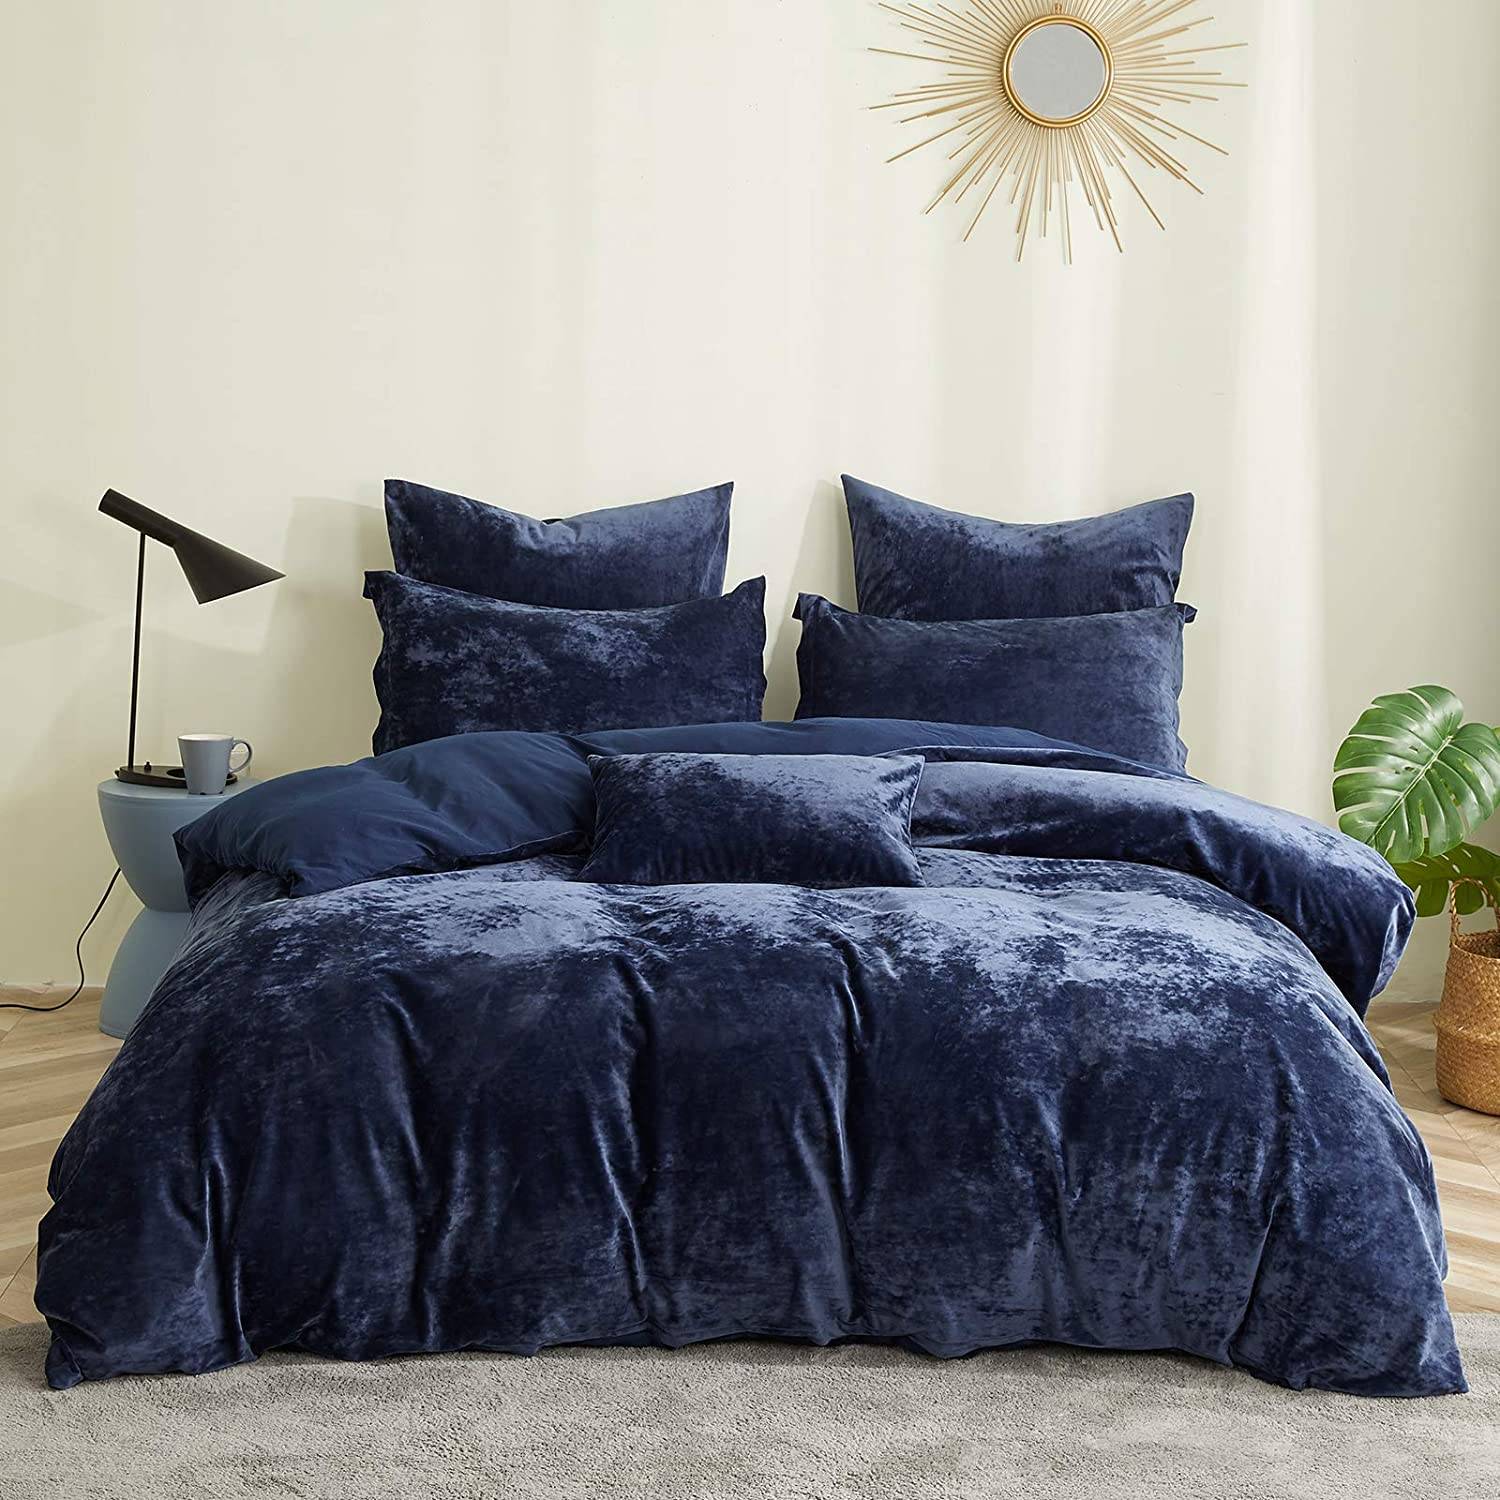 Discount Price Coral Pajamas - Heavyweight Velvet Duvet Cover Set give a comfortable feeling in bedding – SUPER